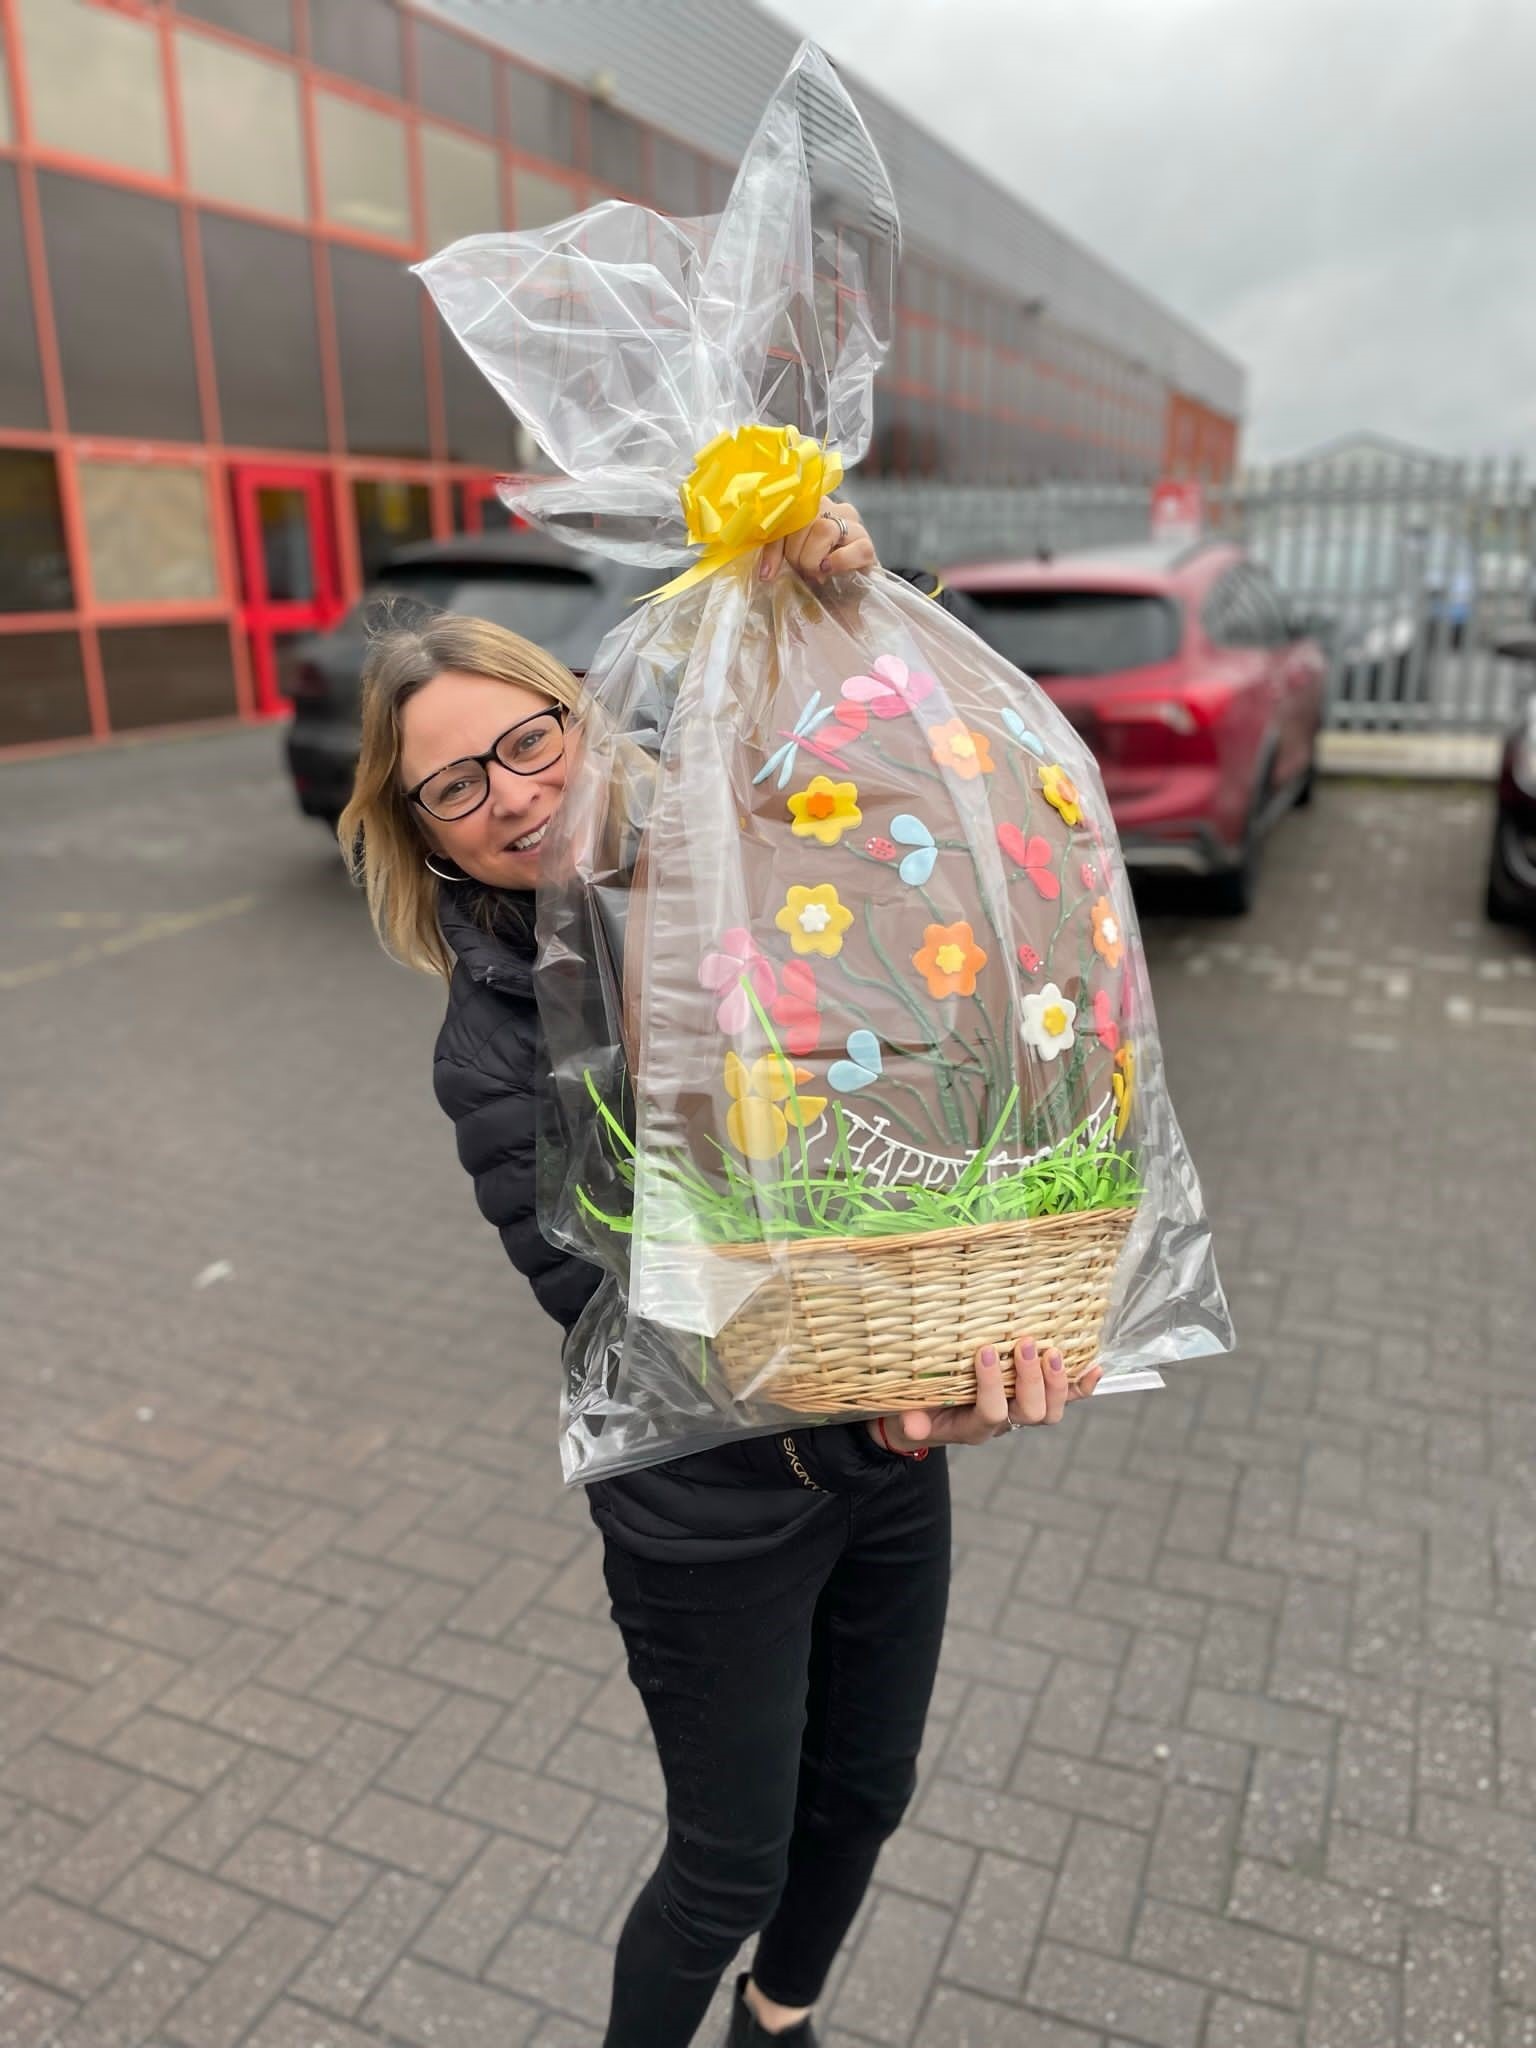 This shows our Fundraising Coordinator Sarah holding a giant chocolate egg. It's in a wicker basket and is wrapped in cellophane.  